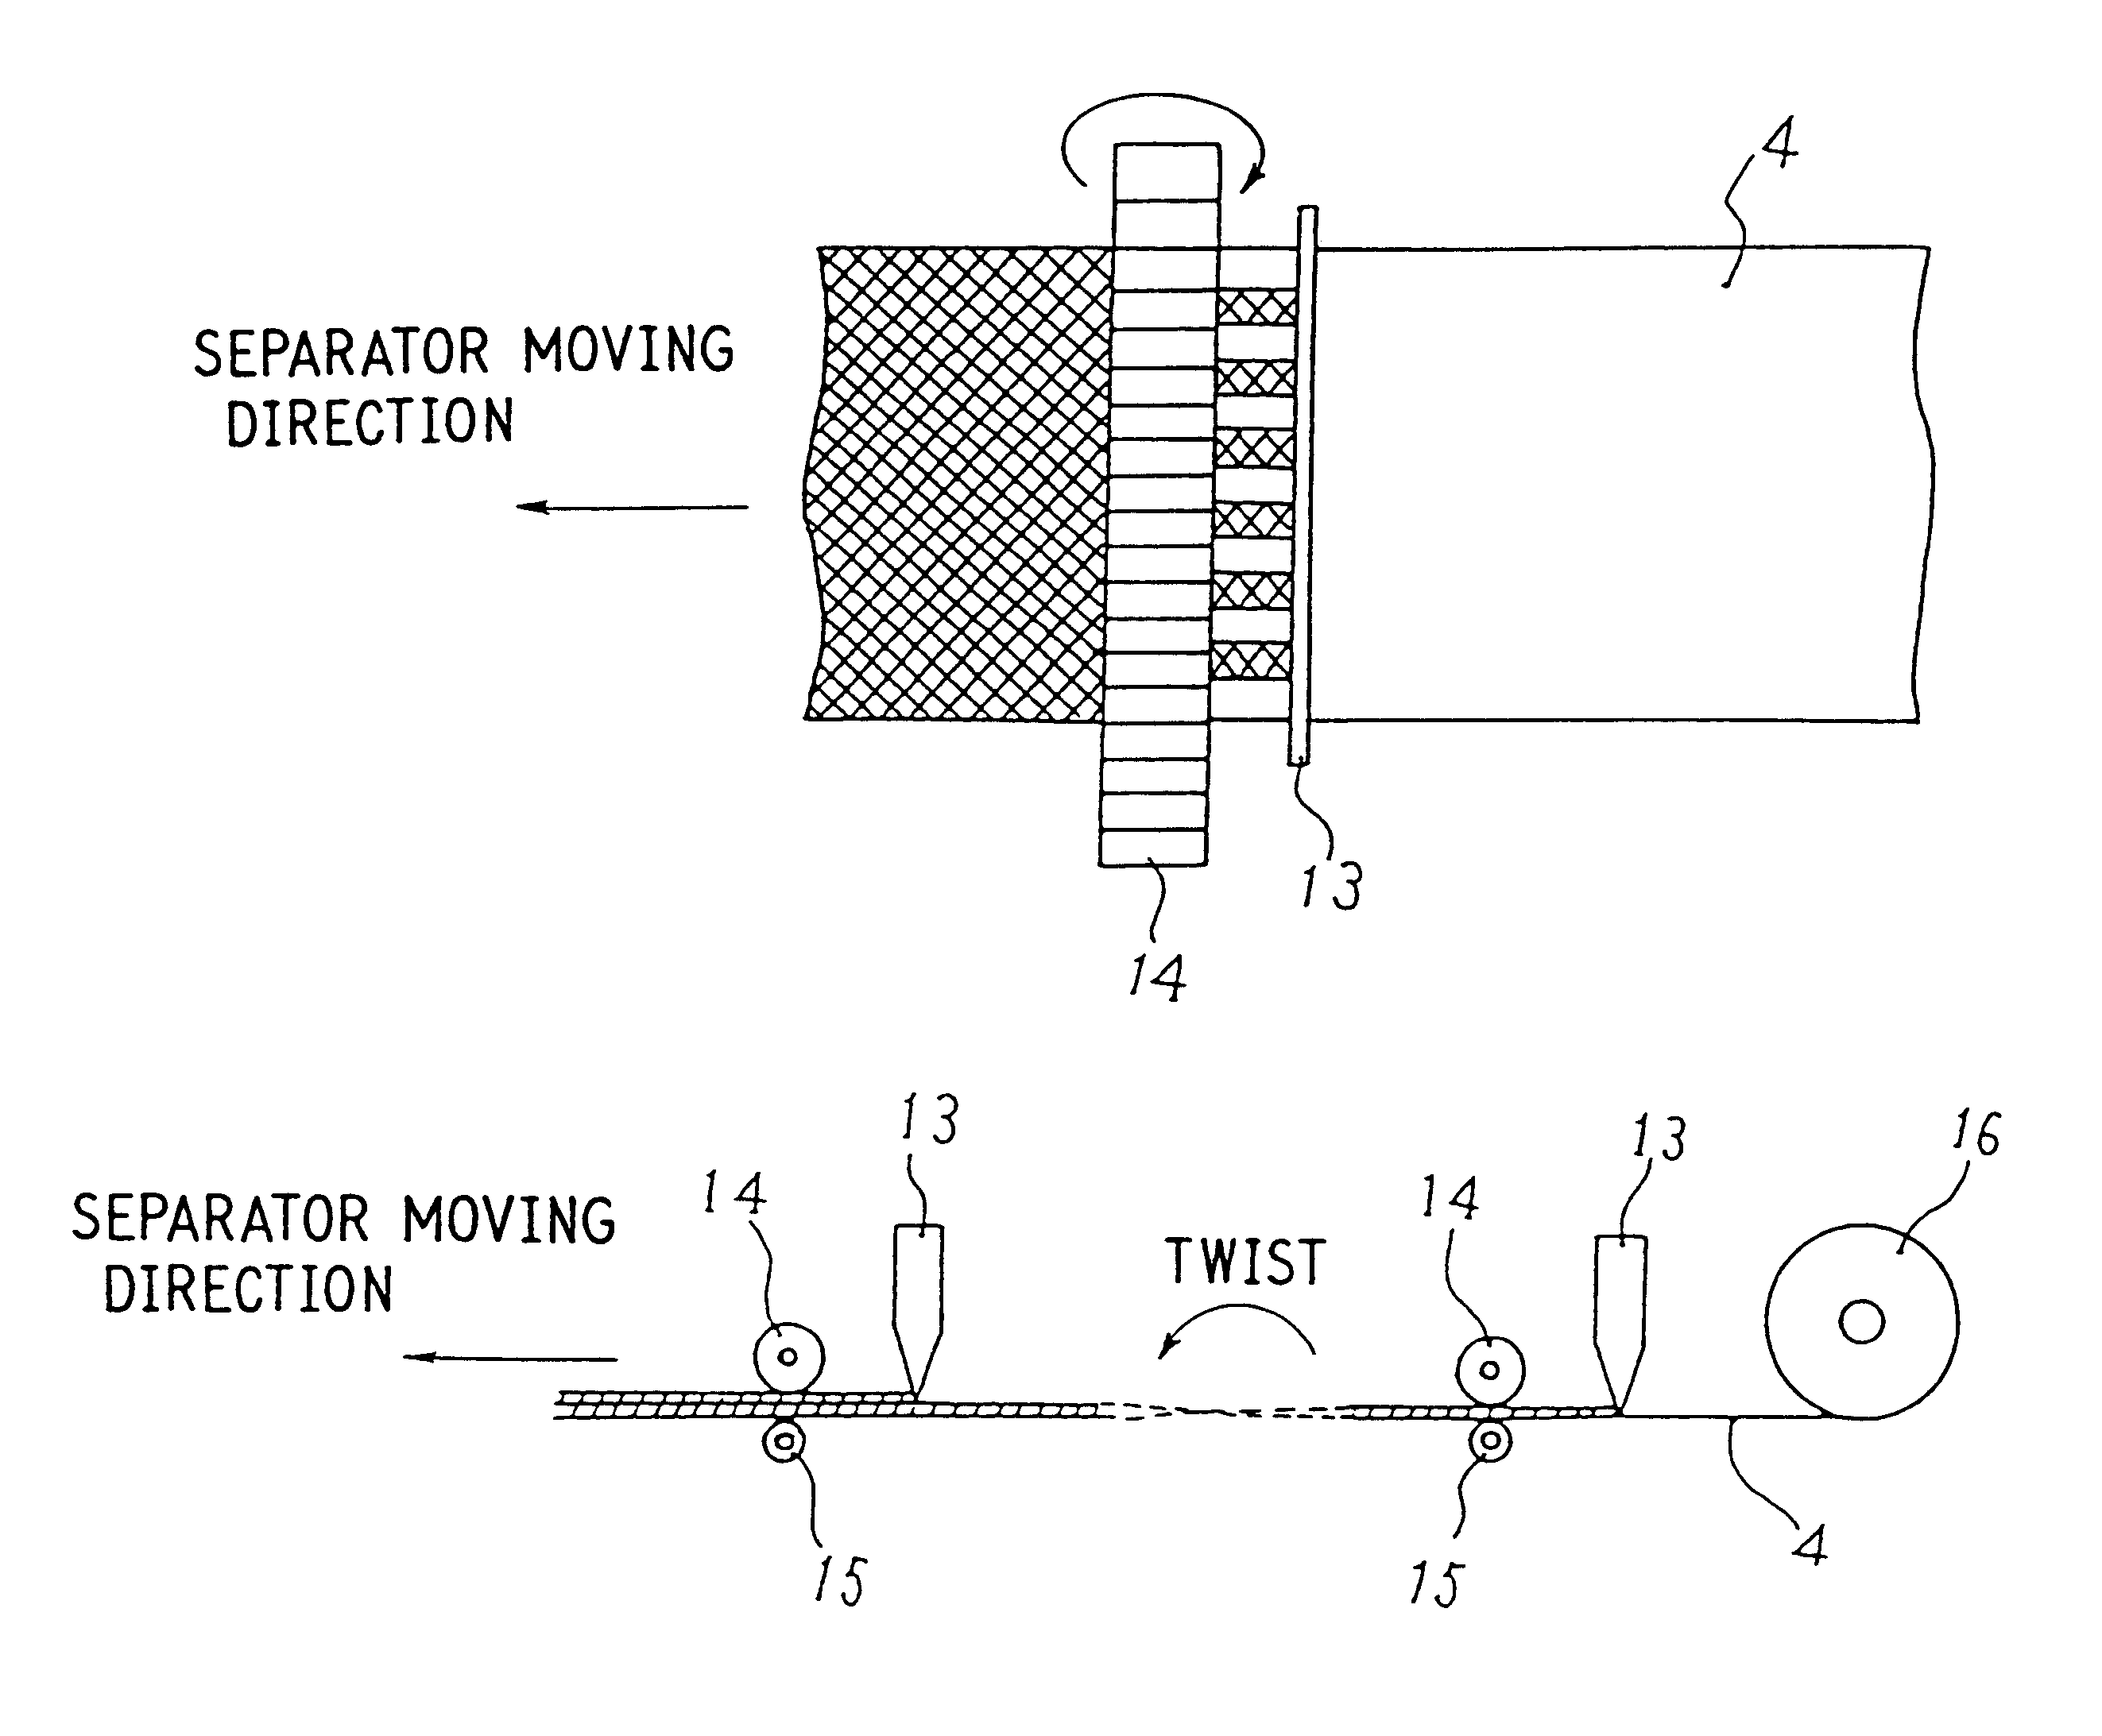 Method for manufacturing lithium ion secondary battery